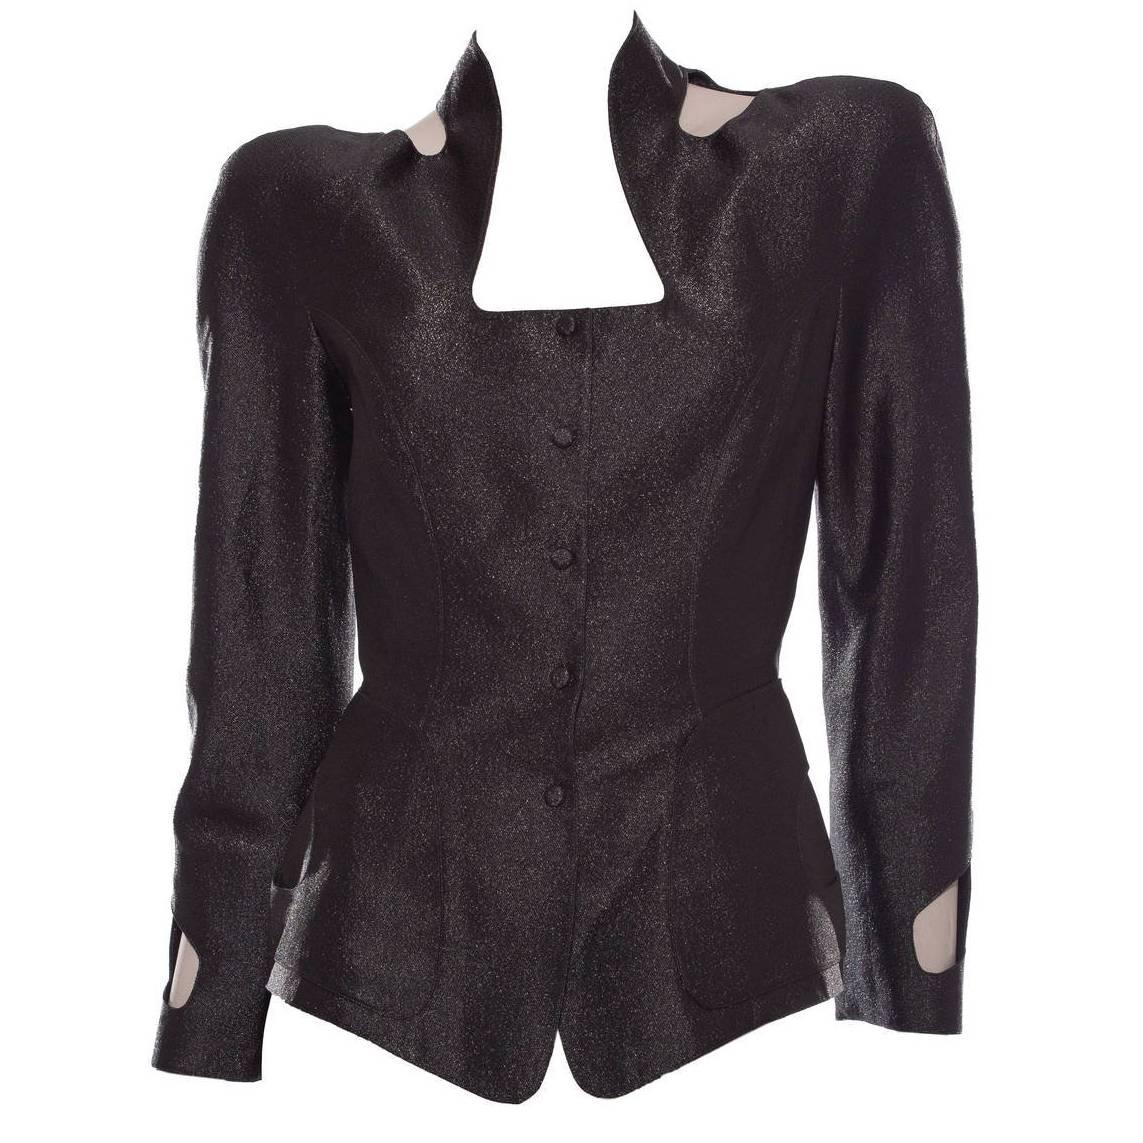 Thierry Mugler Black Jacket With Cut-Out Sleeve And Shoulder, Circa 1980's